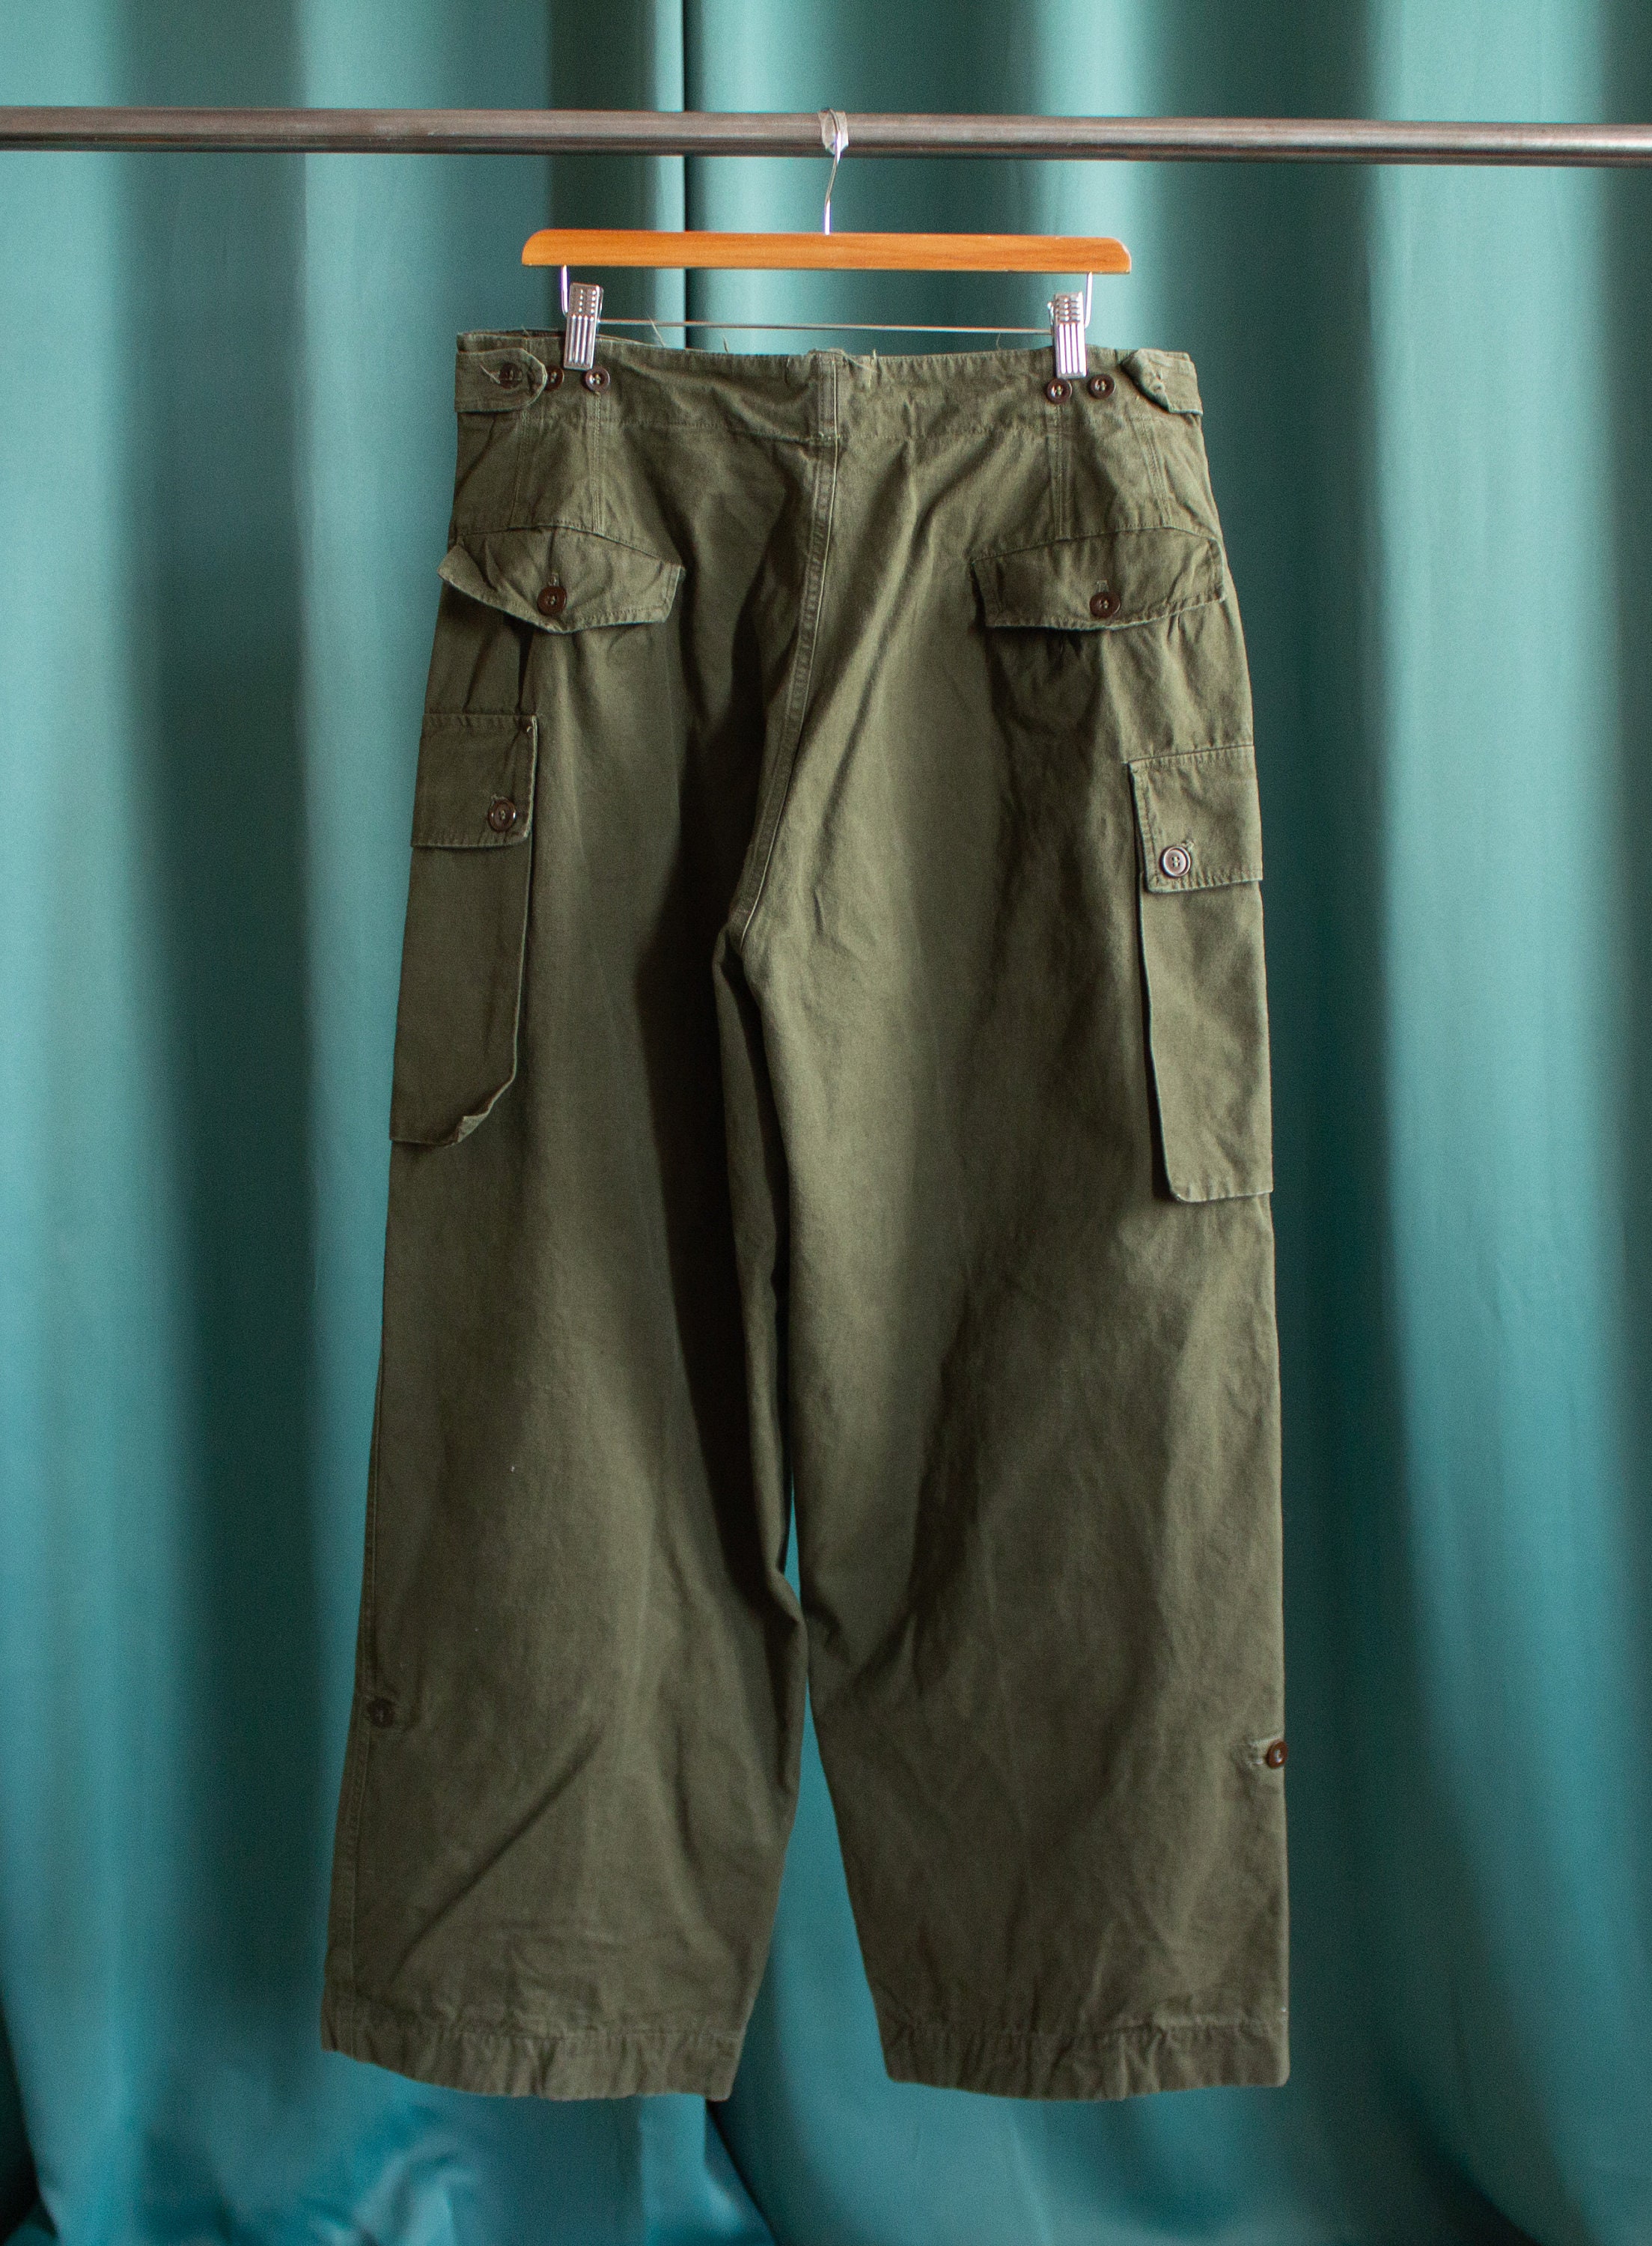 Vintage Military Cargo Pants in Olive Green Cotton Canvas - Etsy